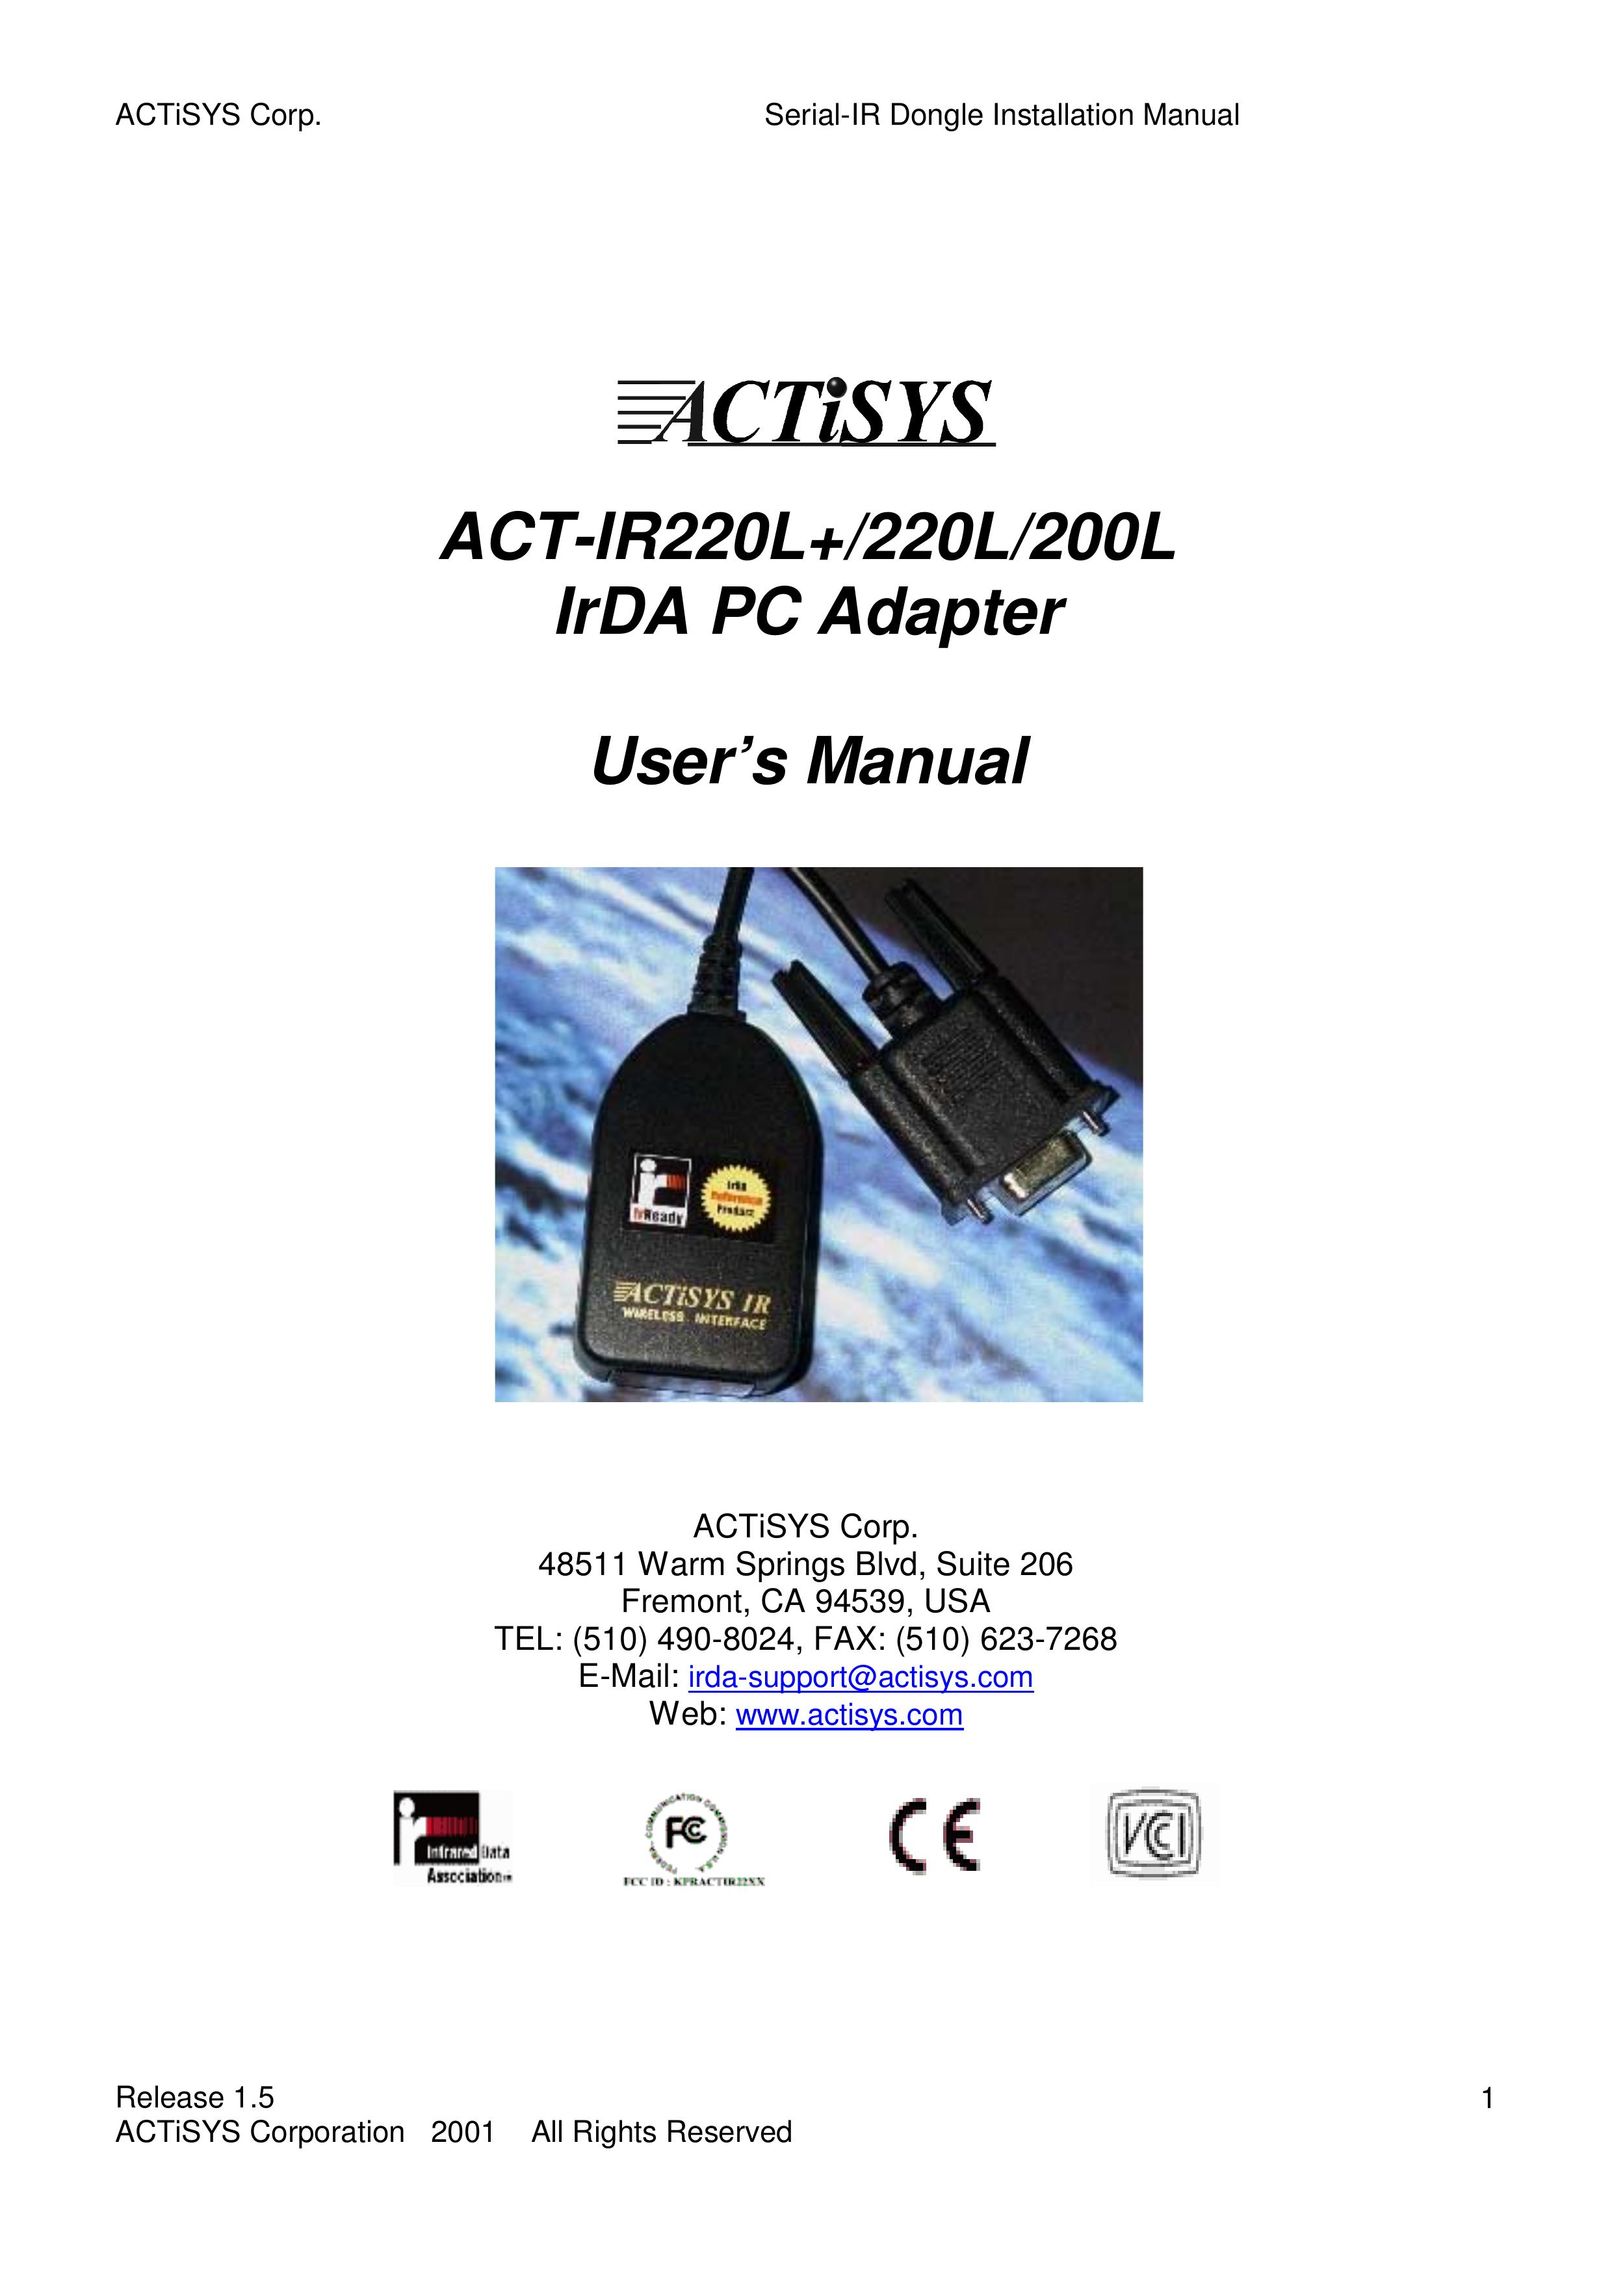 ACTiSYS ACT-IR200L Computer Accessories User Manual